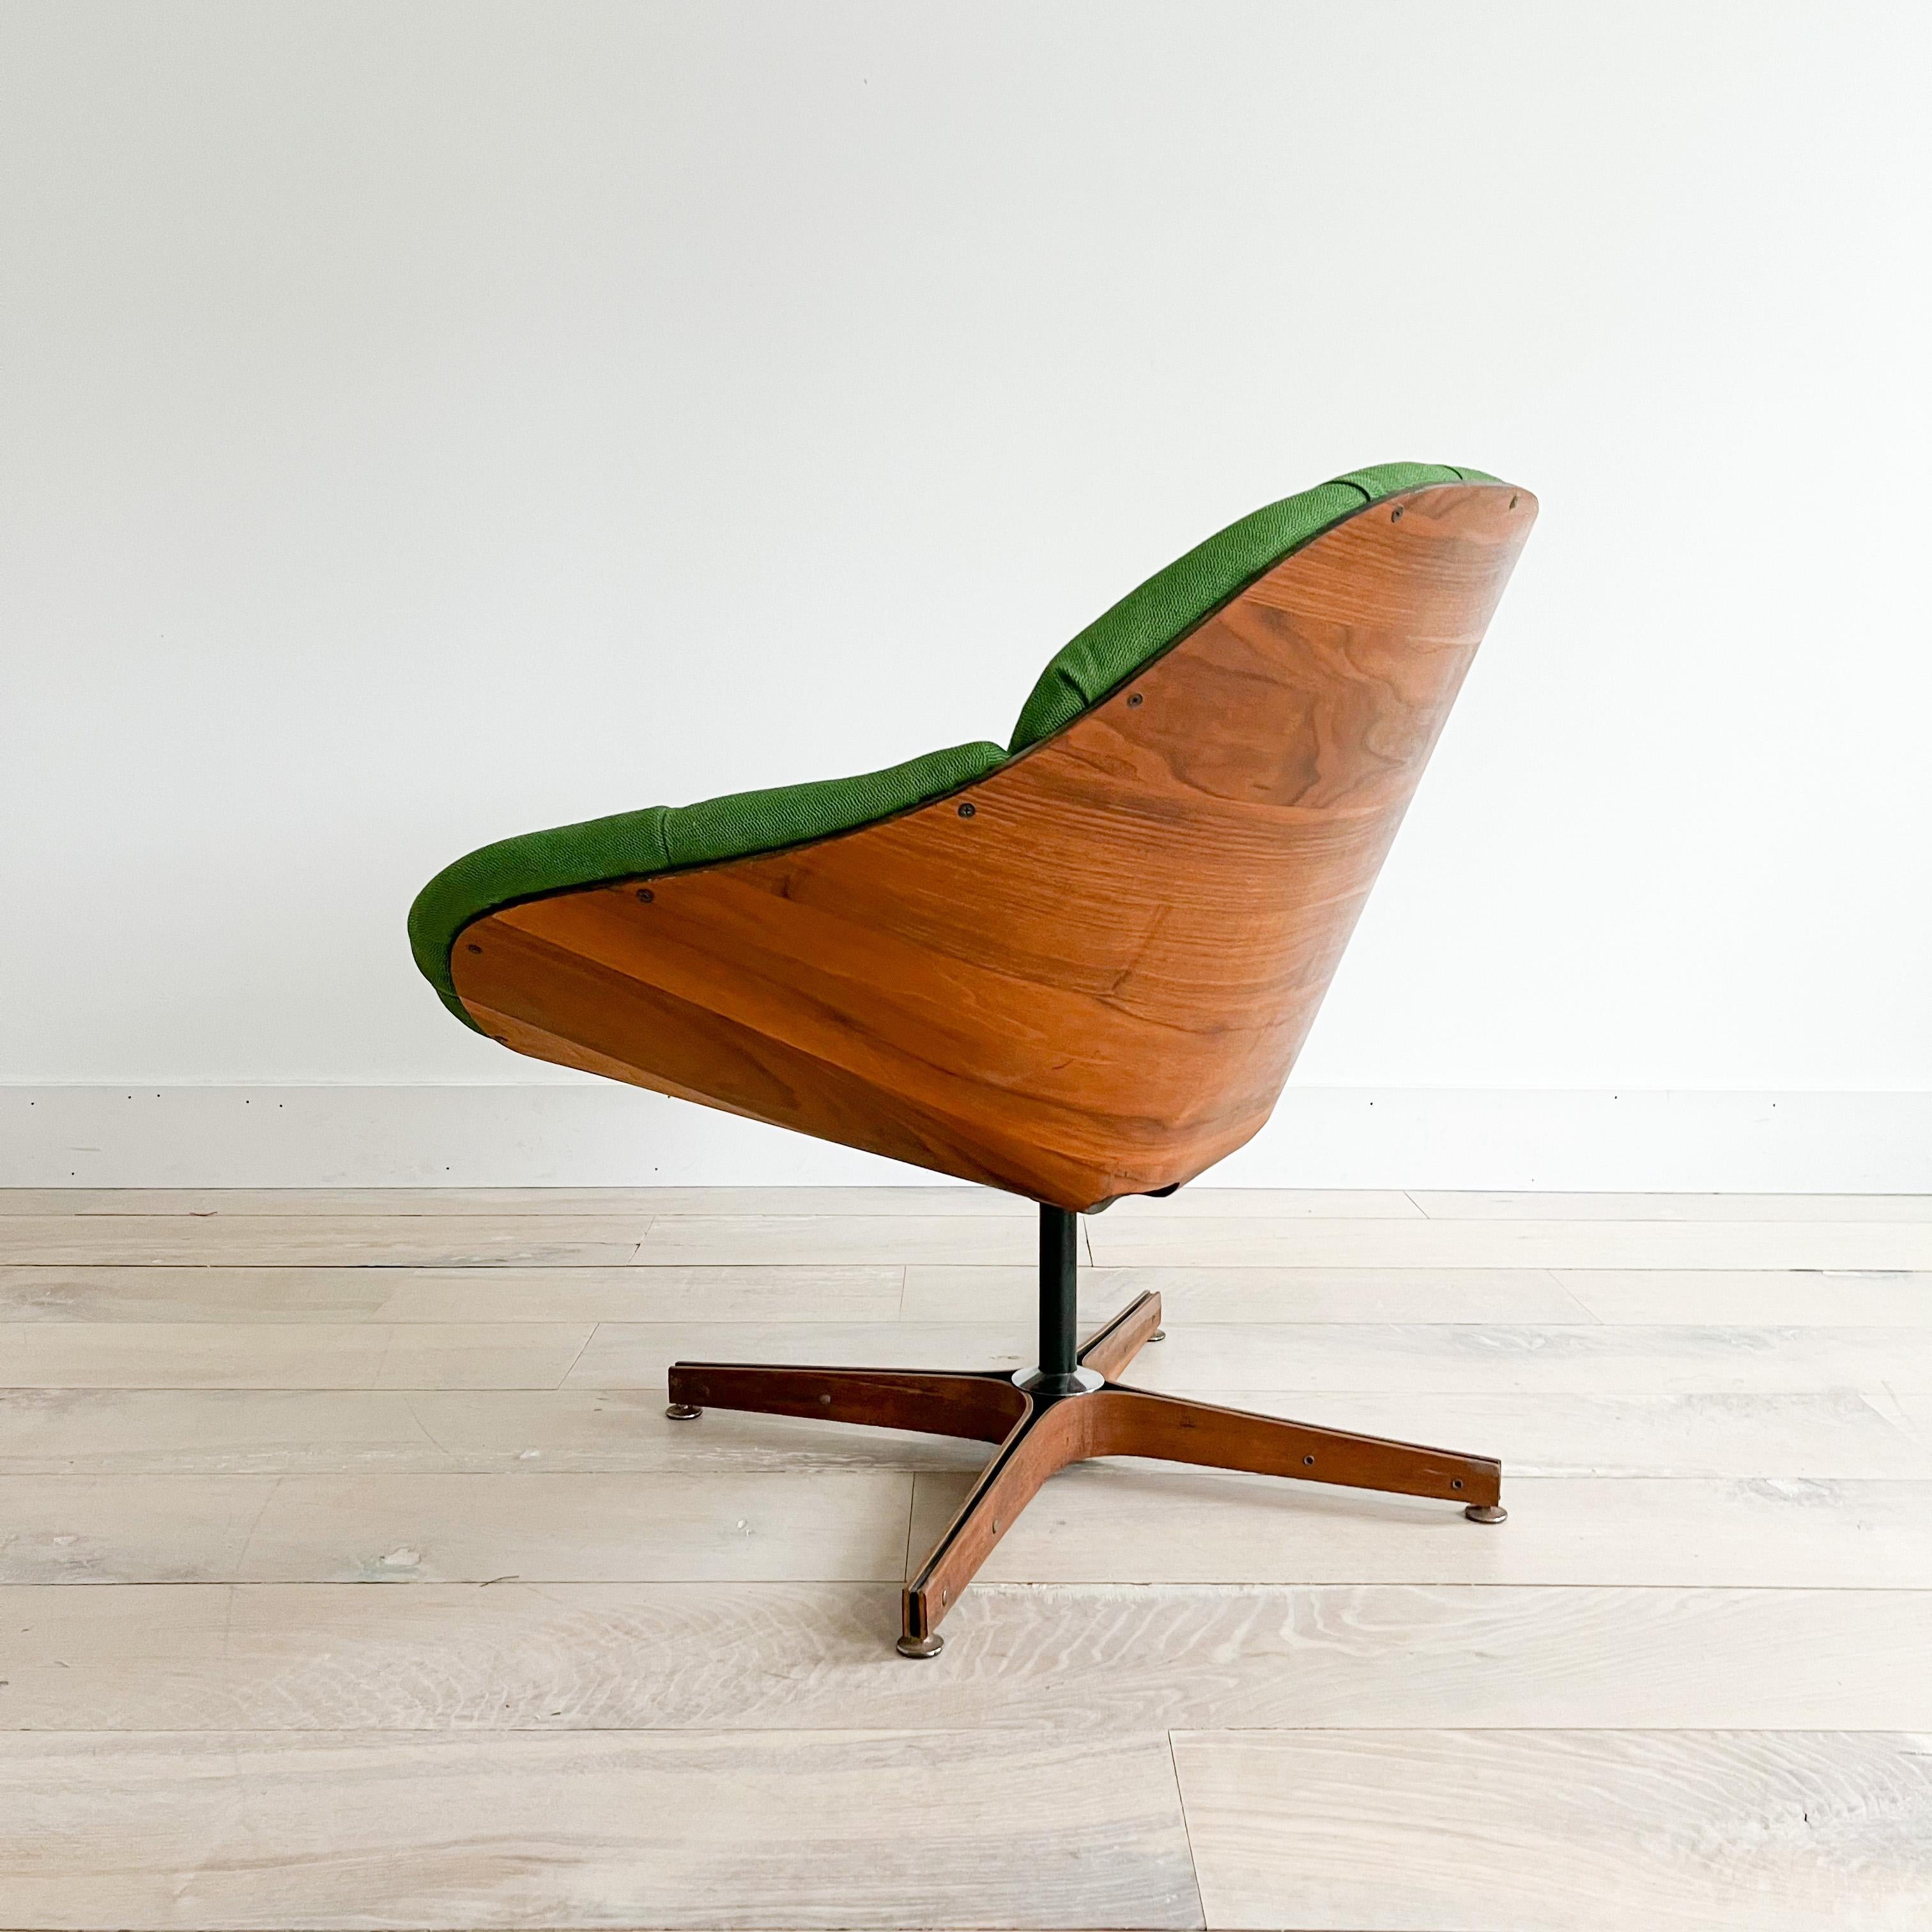 Rare Mid-Century Modern “Mr. Chair” by Plycraft, New Green Upholstery 2